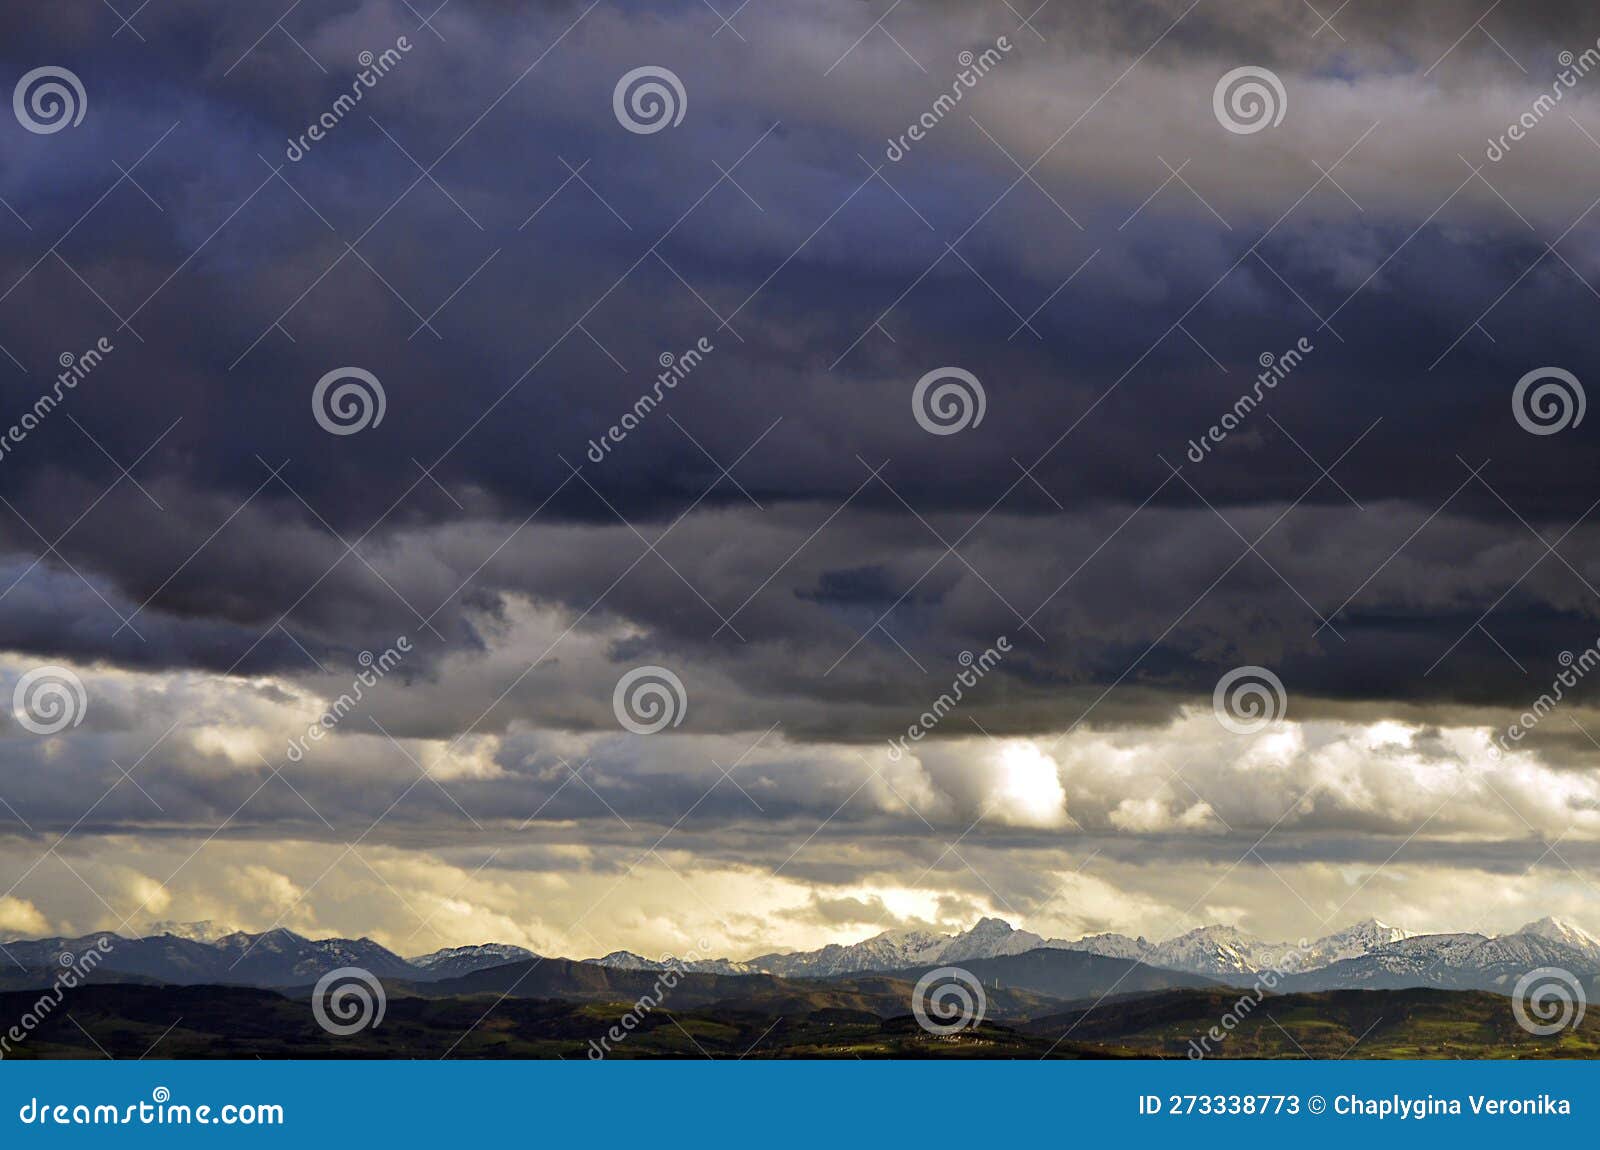 mountains. landscape of alps. sky and mountains. mountains at sunset. cloudy weather. storm. thunder